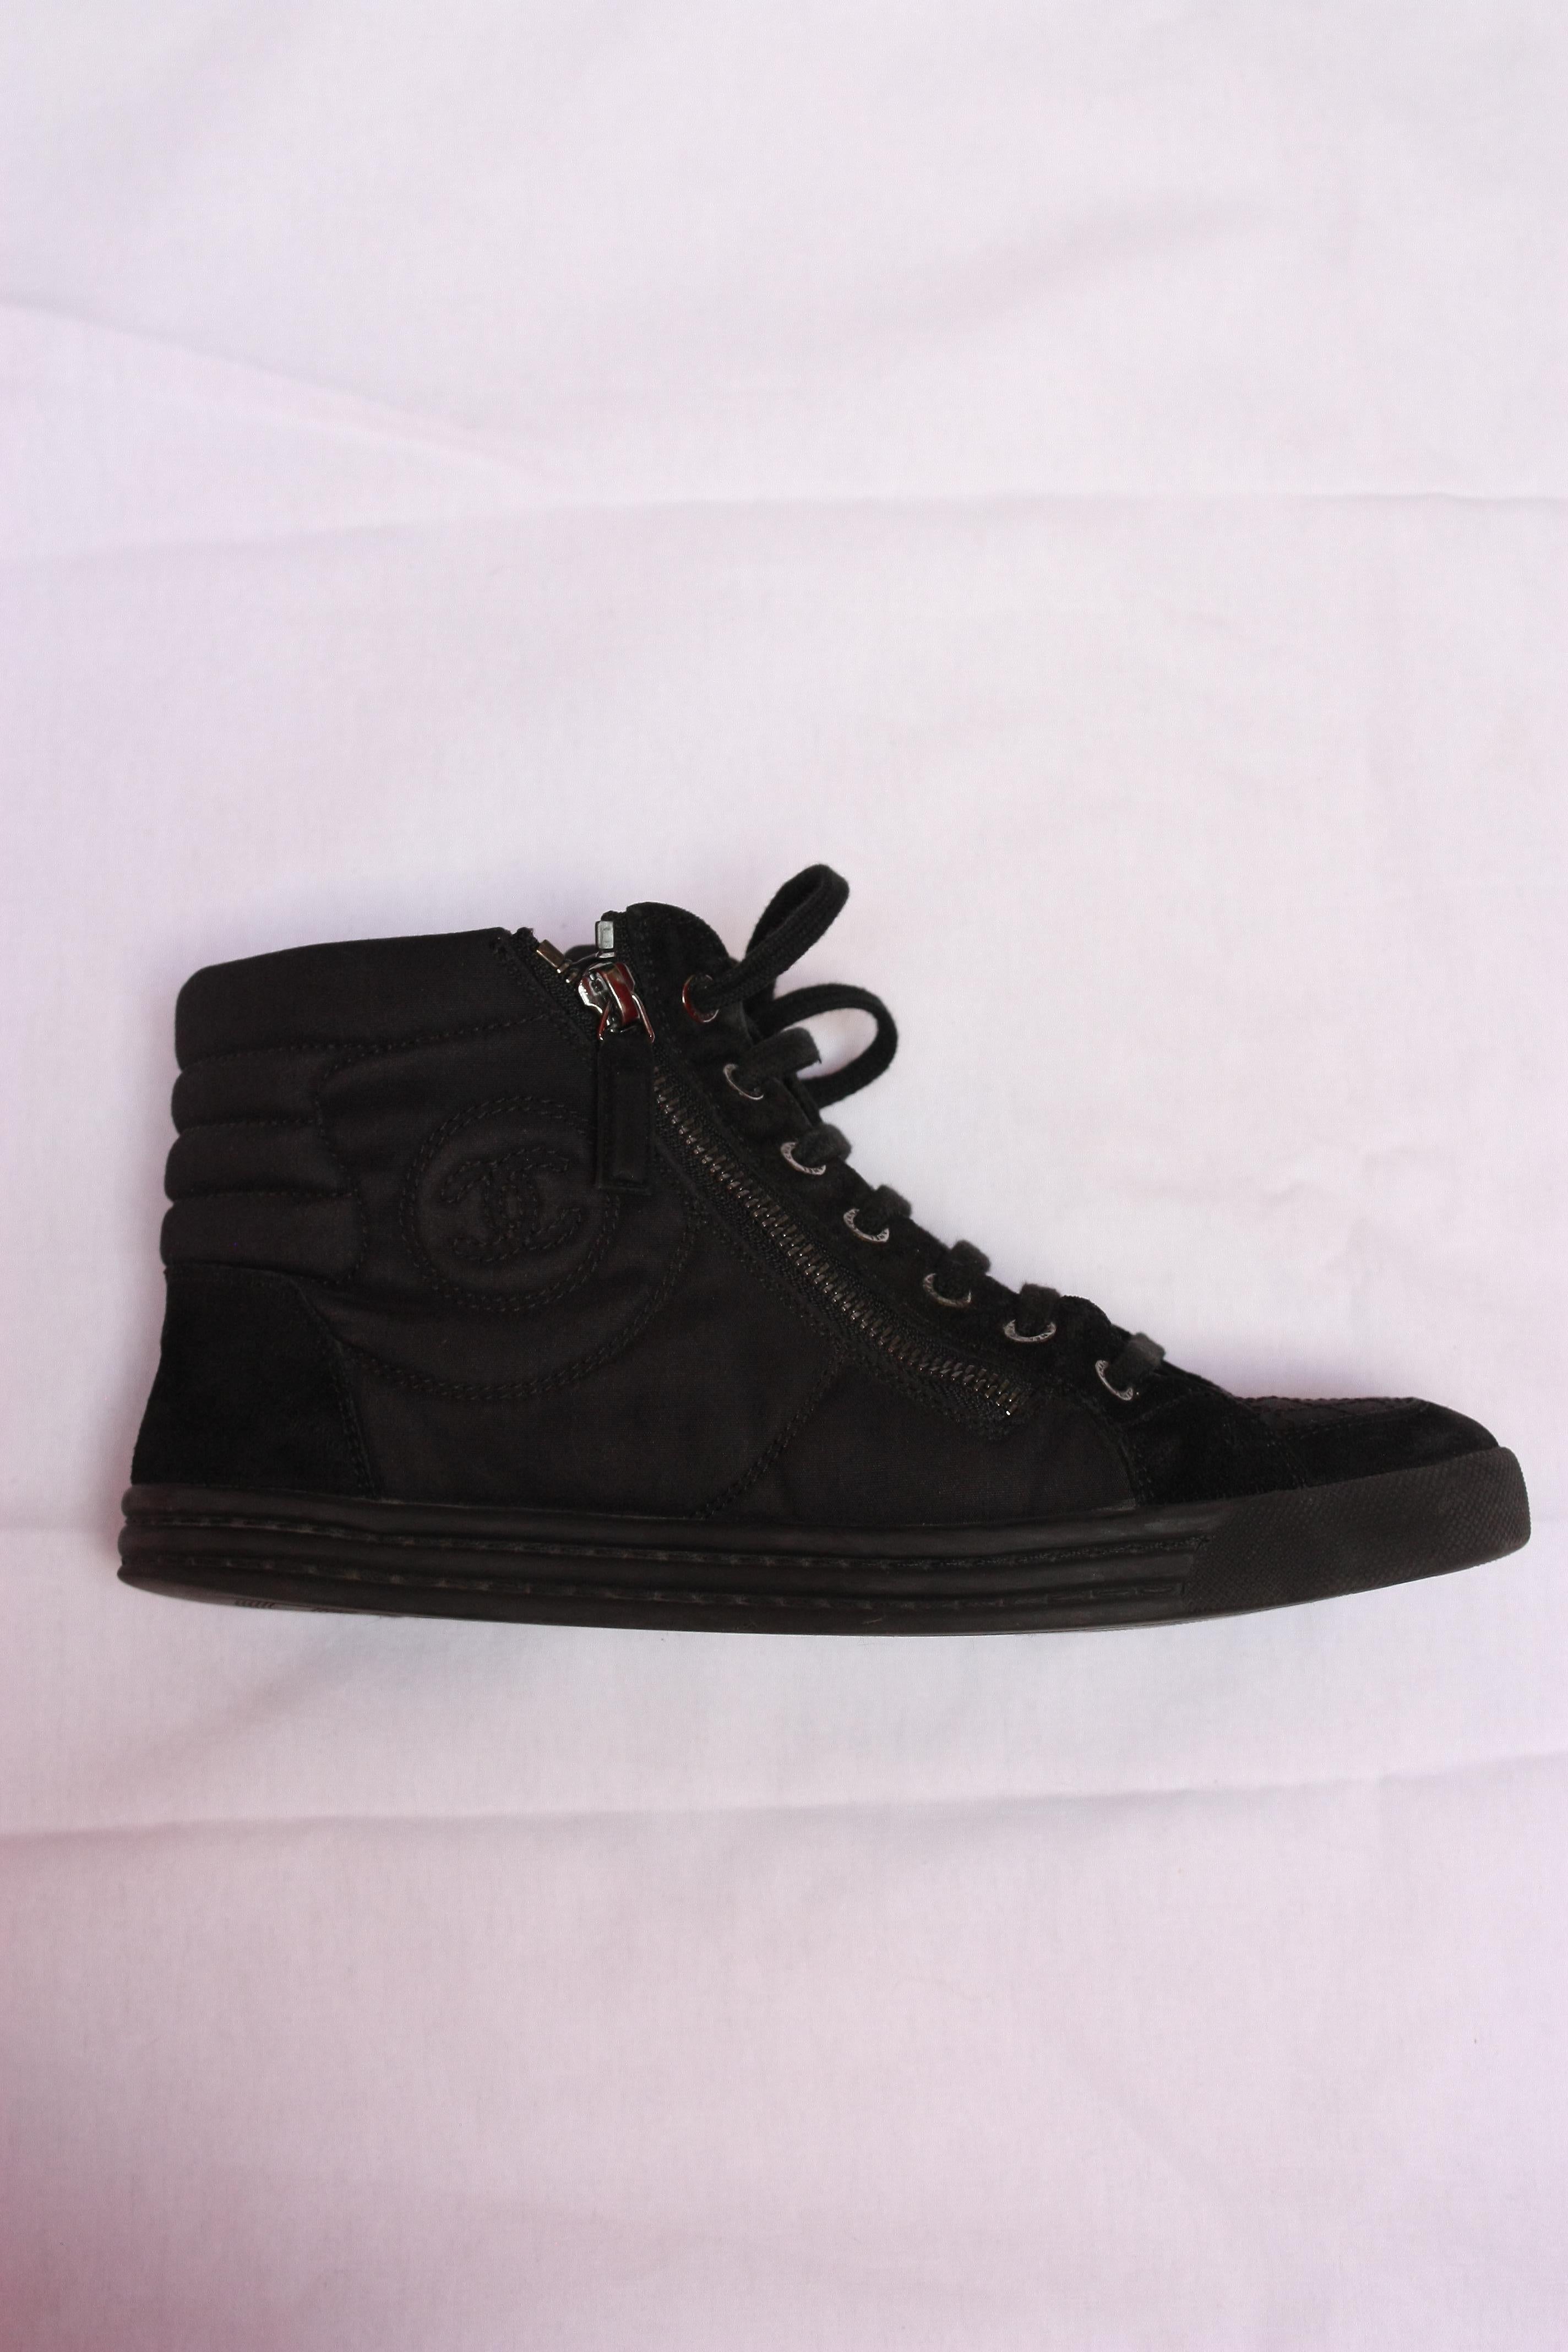 Chanel Black High Top Sneakers In Excellent Condition In Thousand Oaks, CA